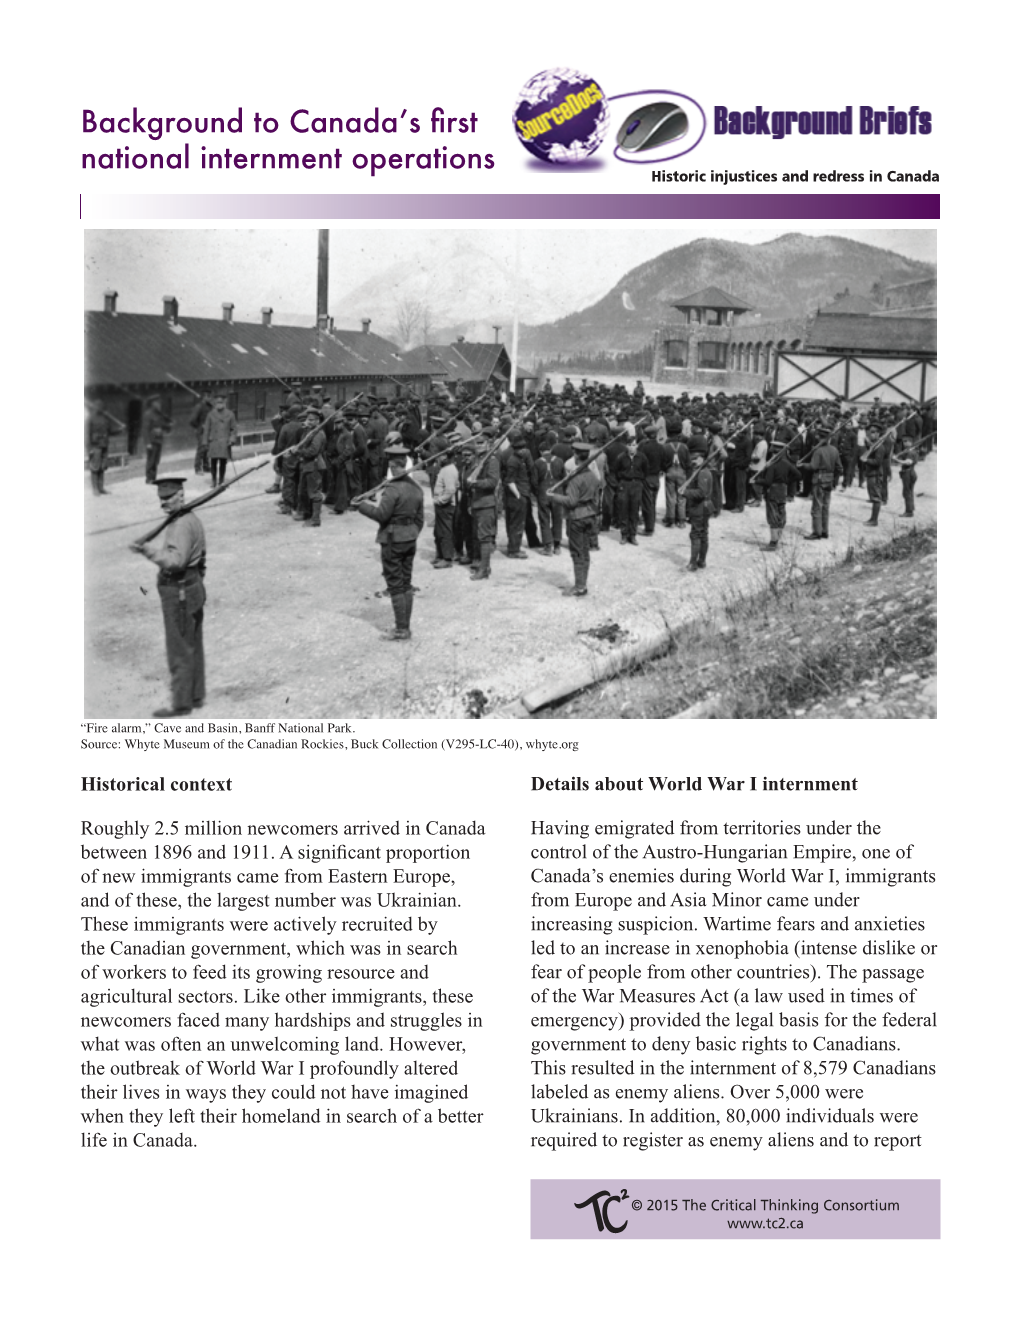 Background to Canada's First National Internment Operations